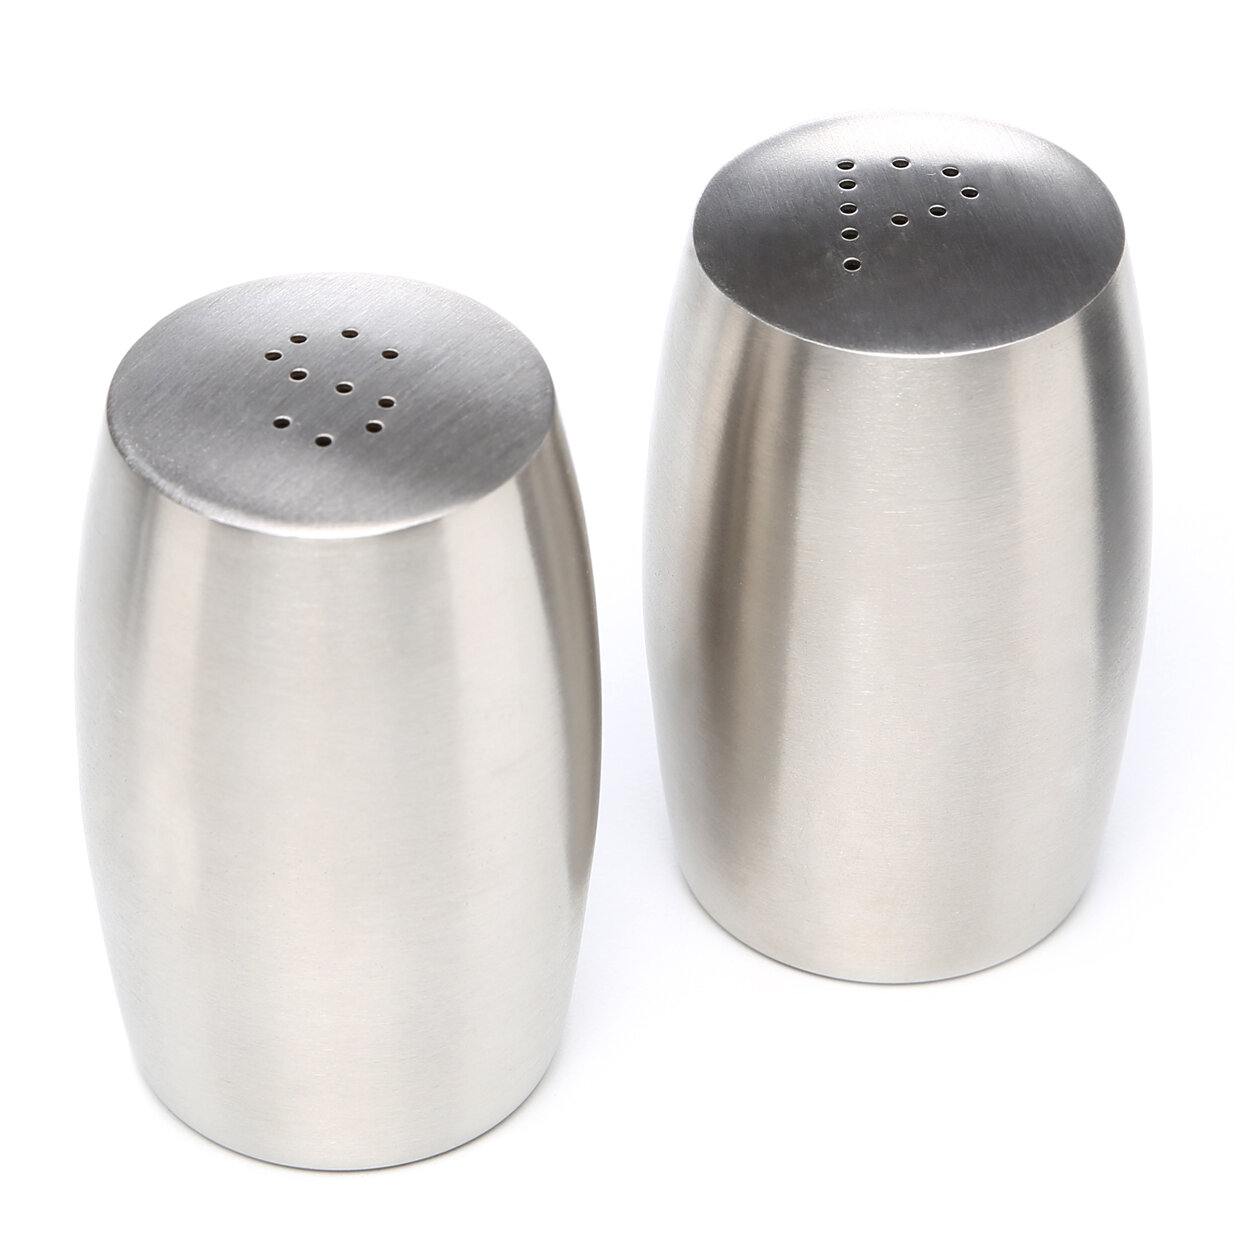 Restaurants Salt and Pepper Shakers by Home Essentials & Beyond BBQ Ideal for Home Use Salt Shaker Set with Metallic Rack Picnic Non-BPA Glass and Stainless Steel Tops 